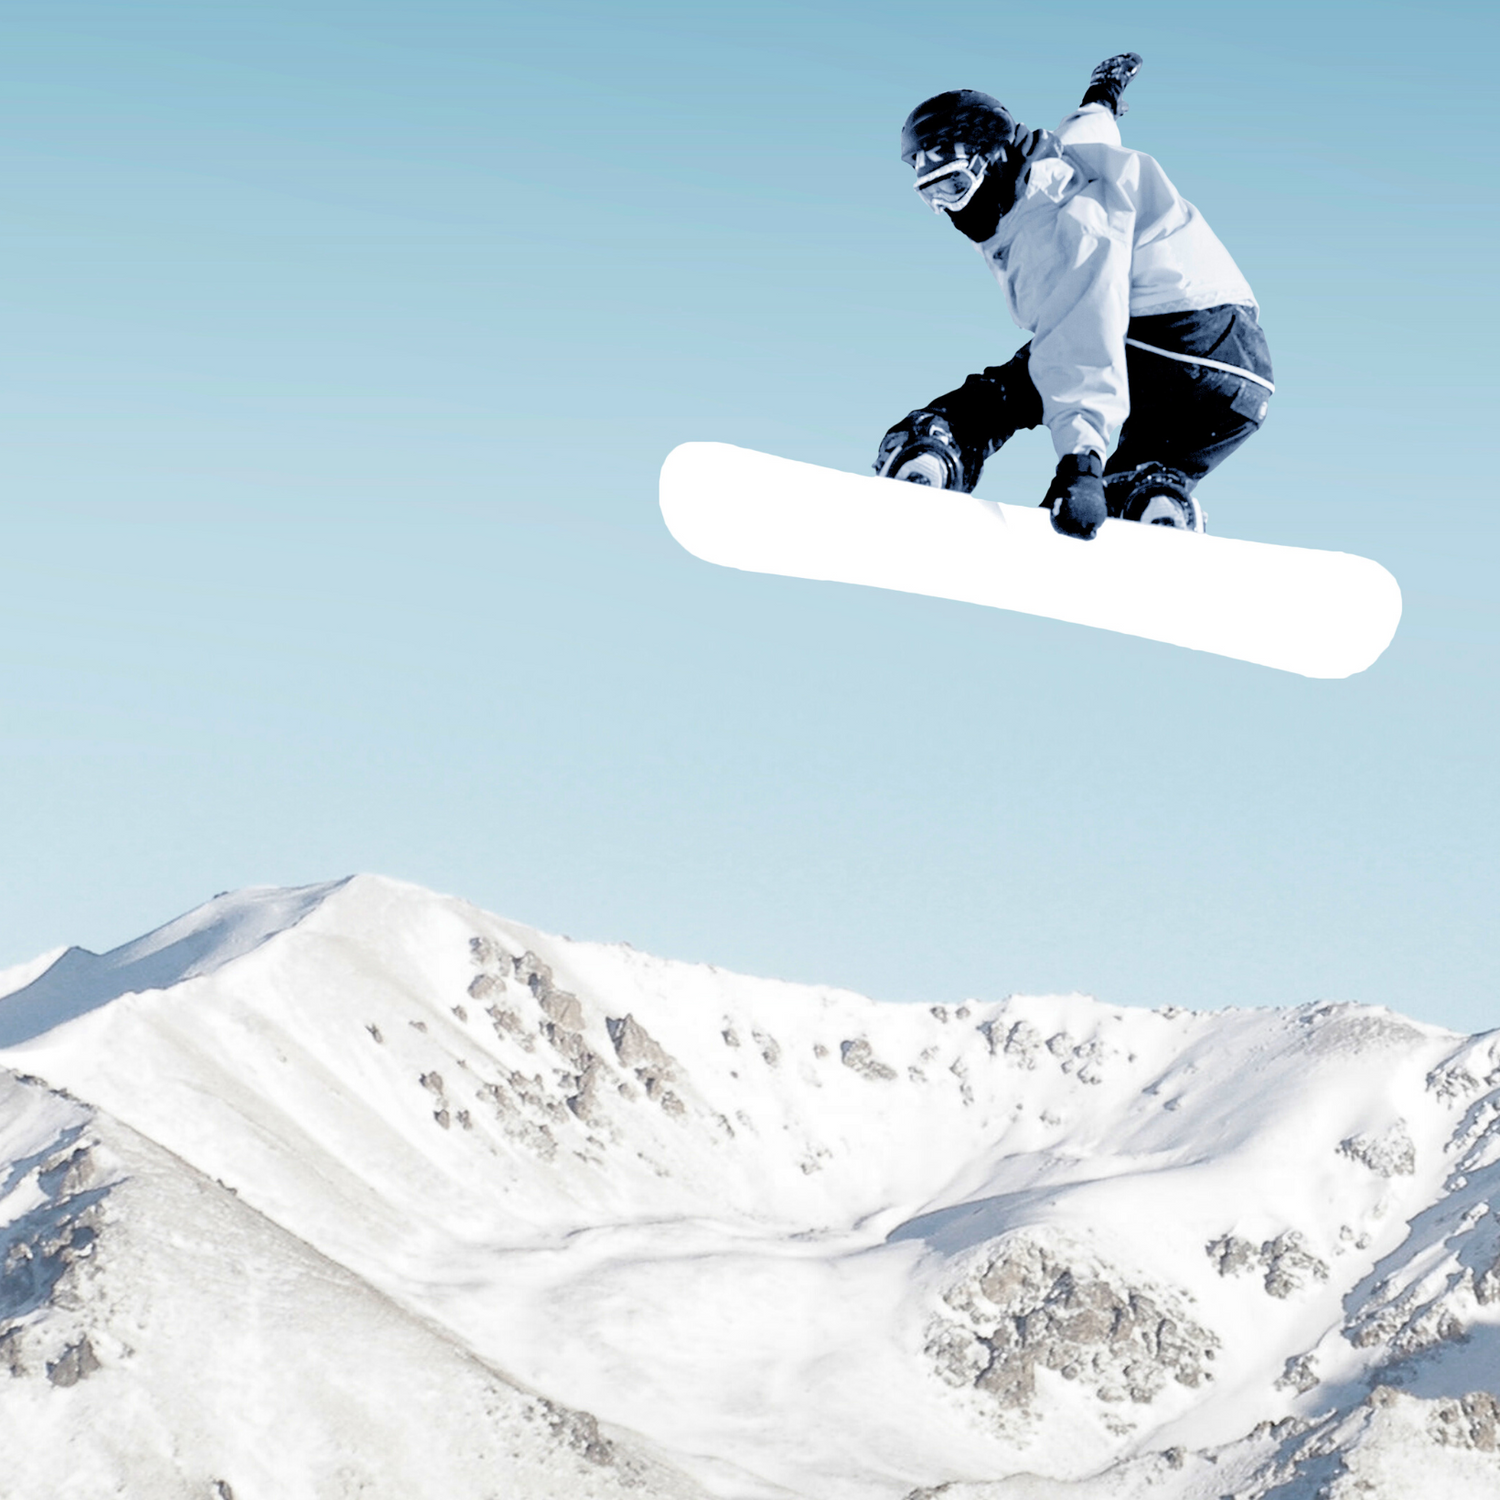 A snowboarder catches air while jumping off a snowy slope with breathtaking mountain peaks in the background